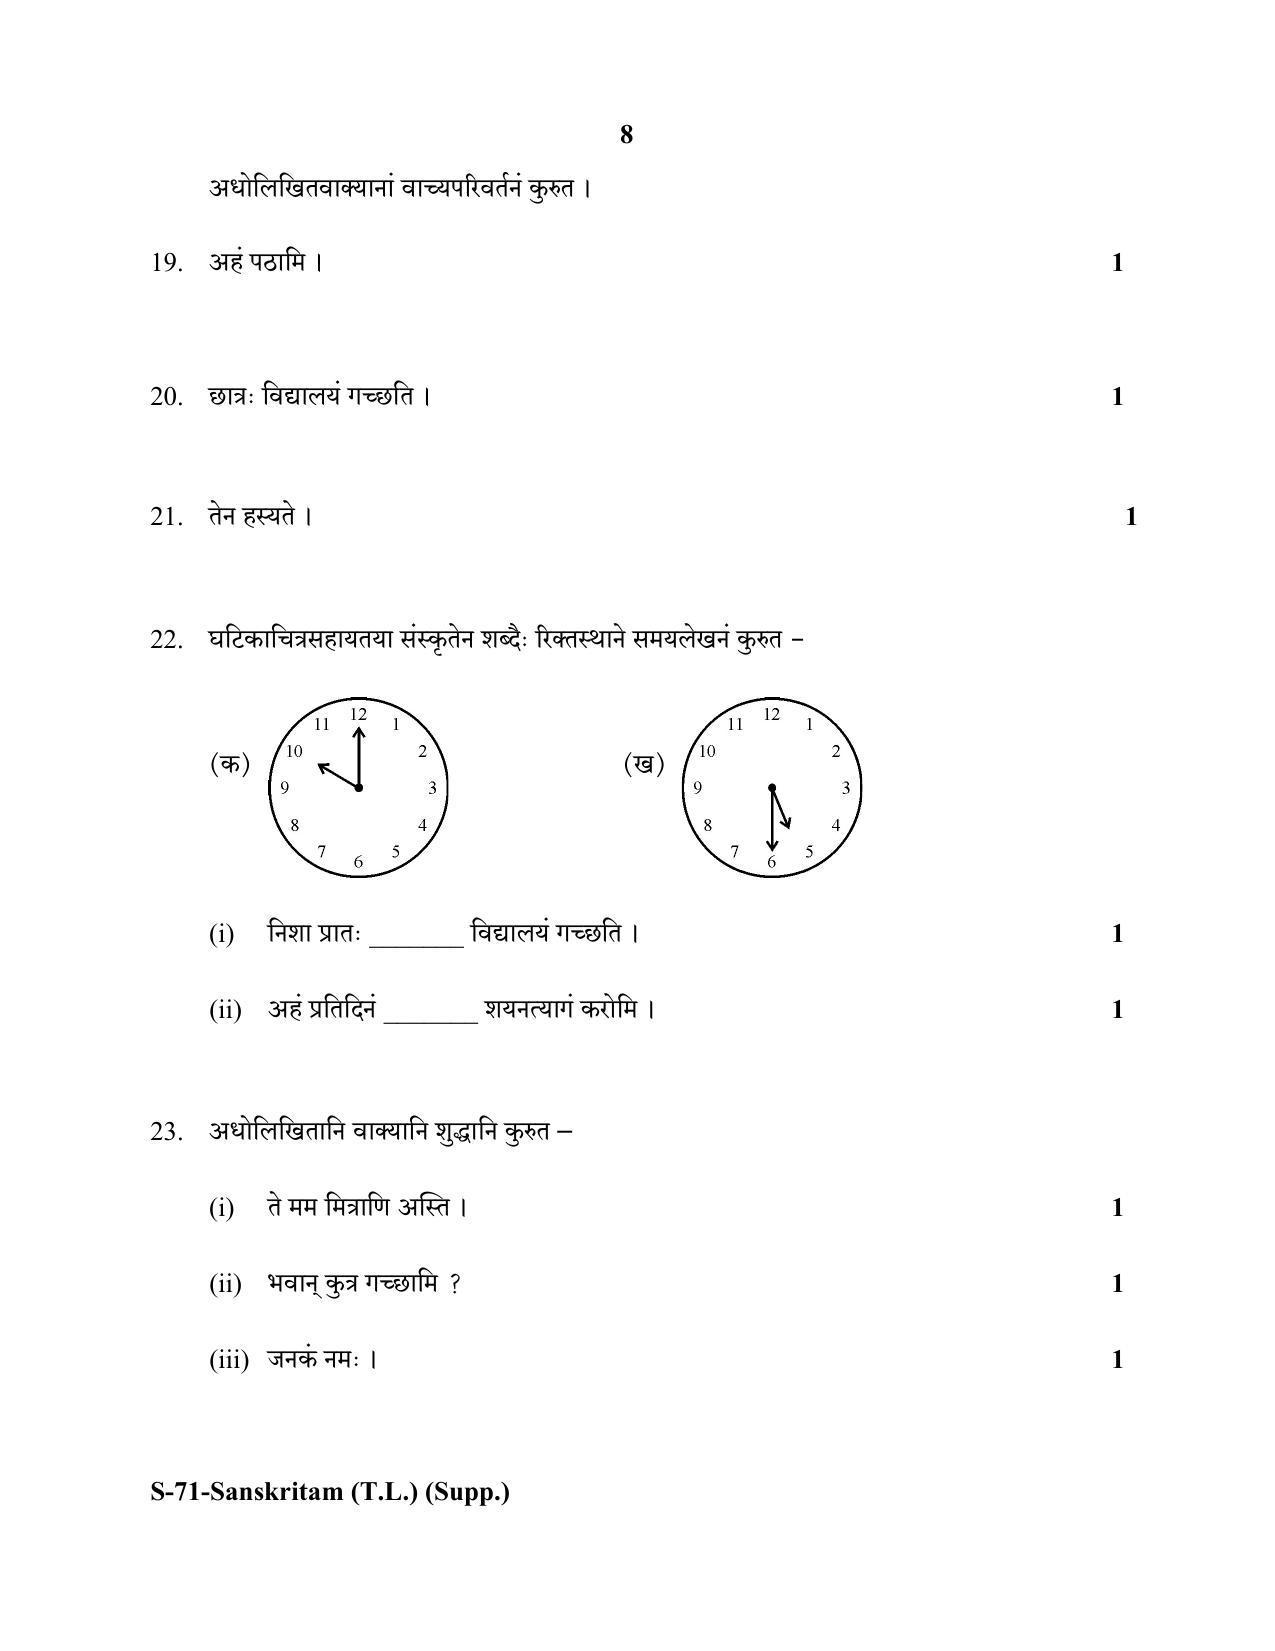 RBSE Class 10 Sanskrit TL Supplementary 2020 Question Paper - Page 8